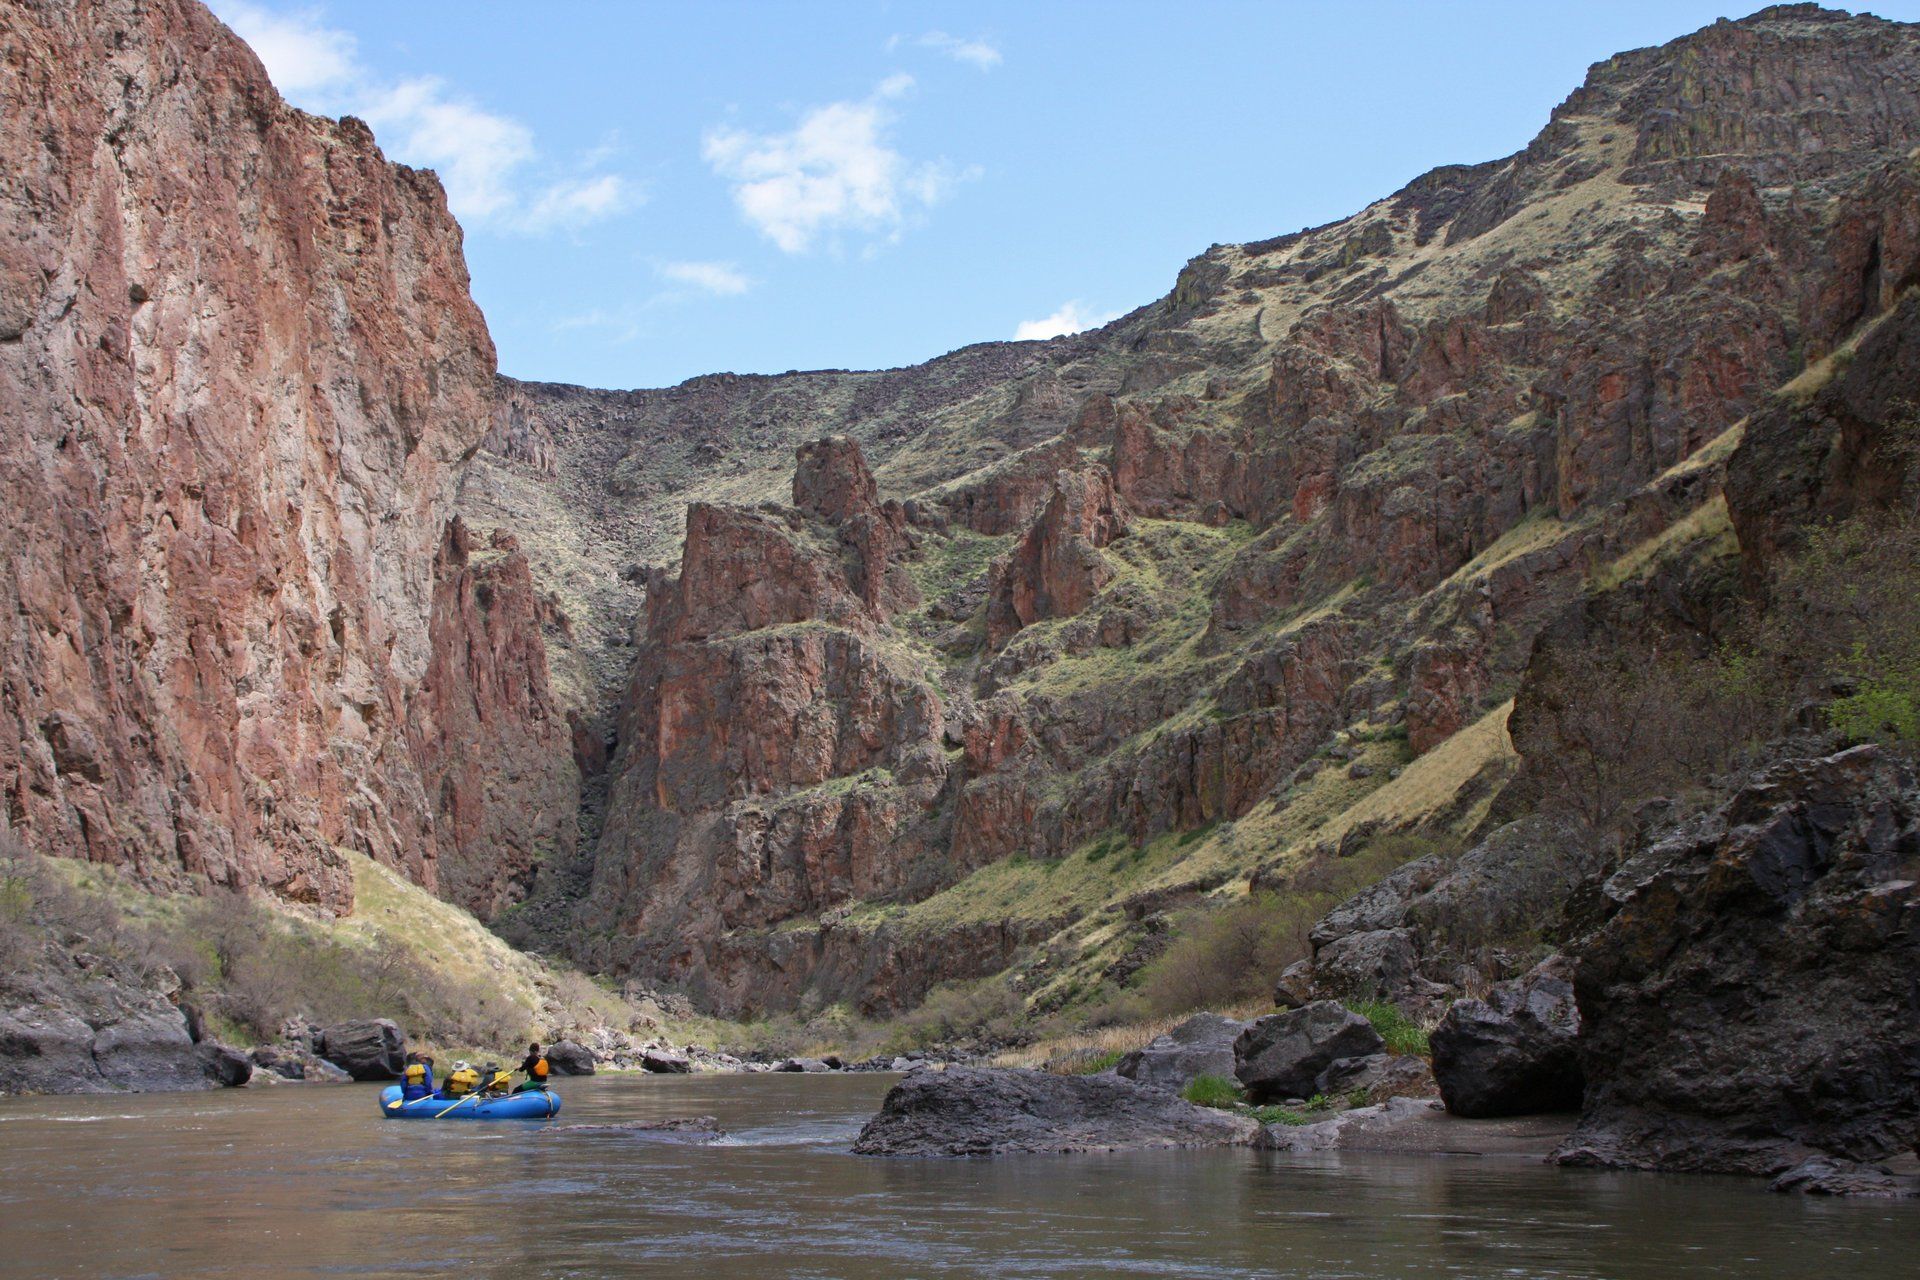 Rafting through green dragon canyon on the owyhee river